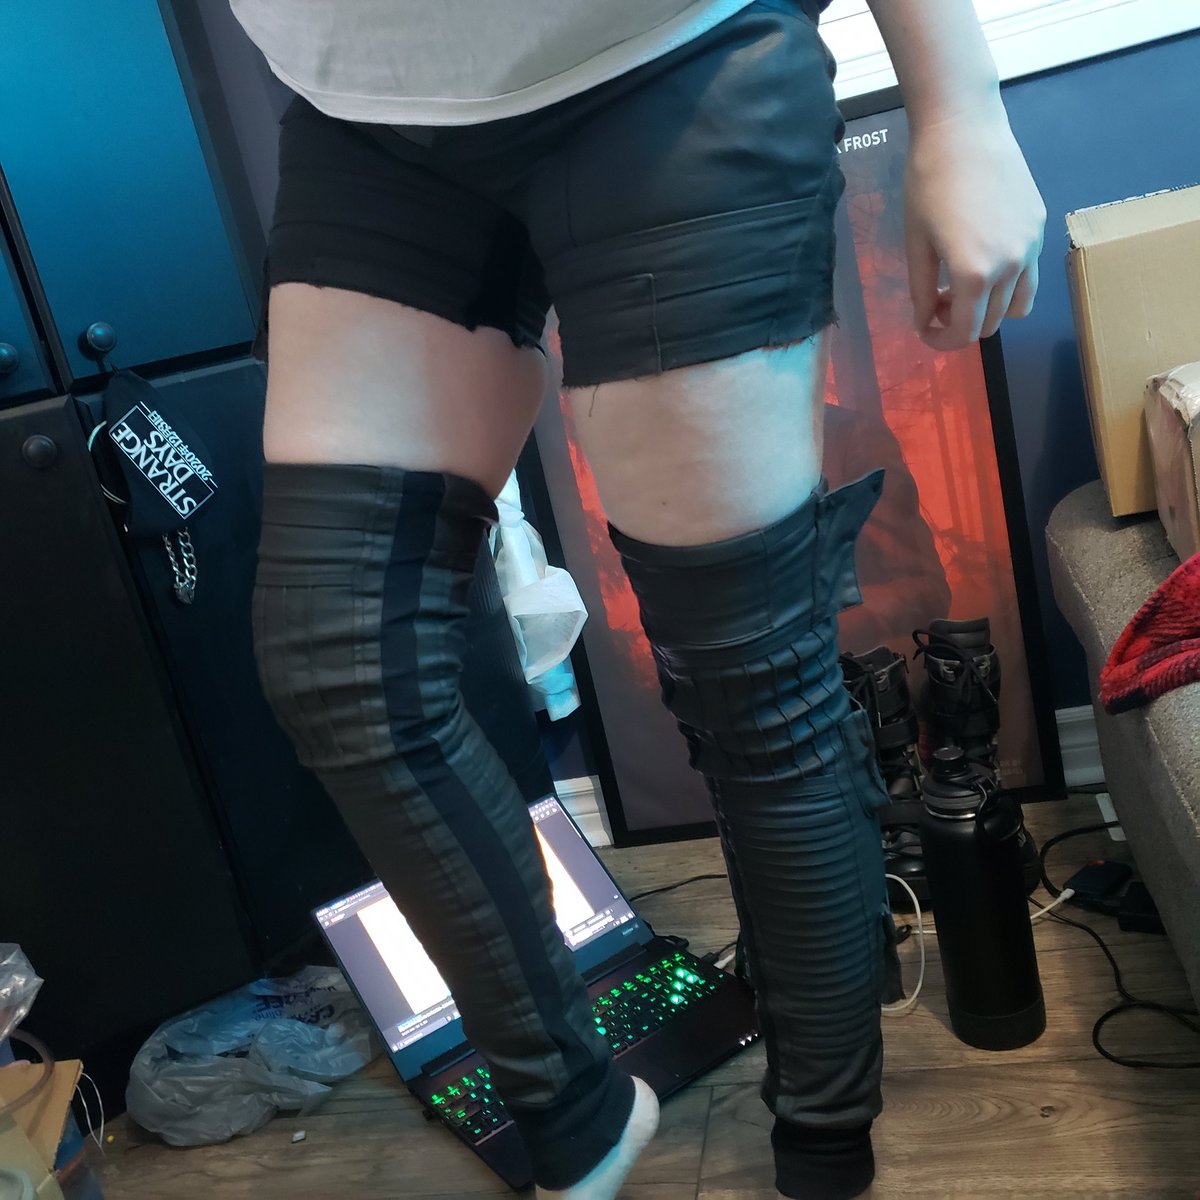 Got my friend to try on the TACTICAL THIGH HIGHS. 